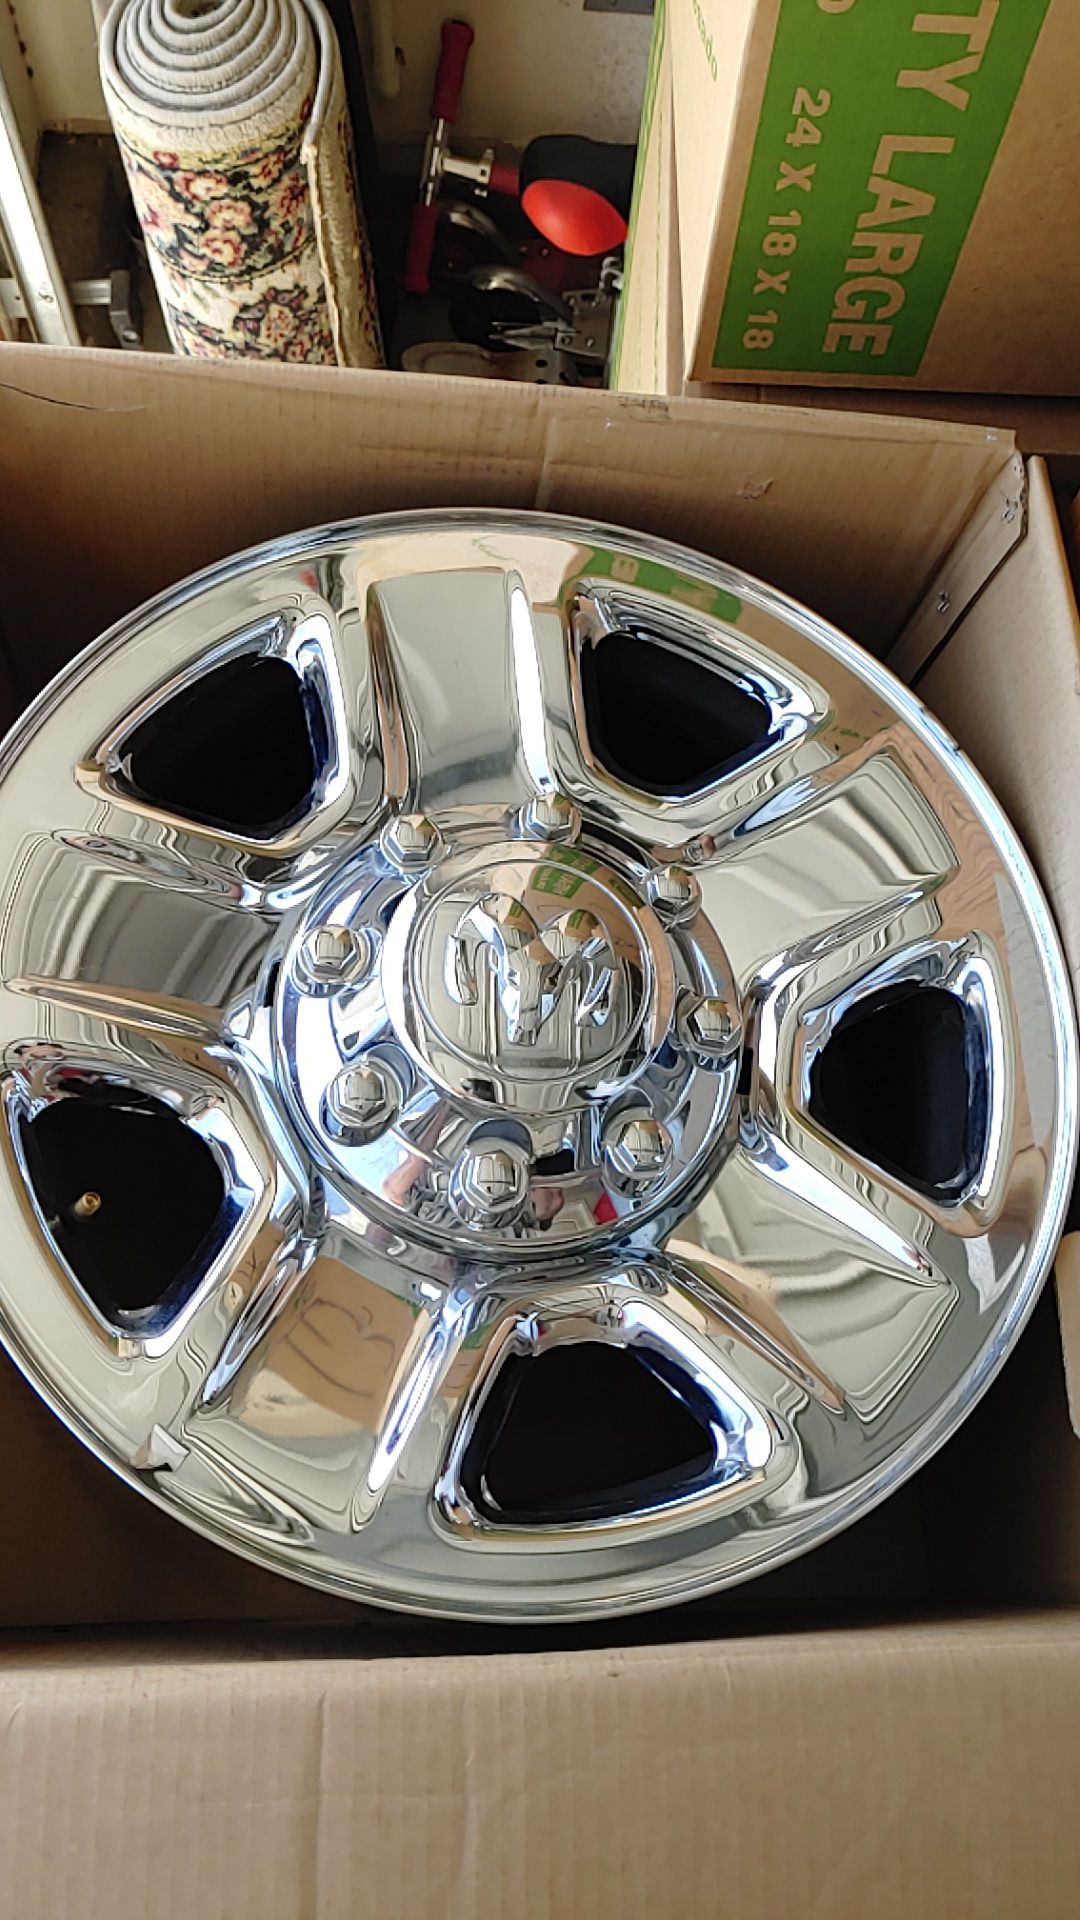 4 Dodge 18x8 rims. 8 lug as shown in photos.Includes center caps and lug nuts